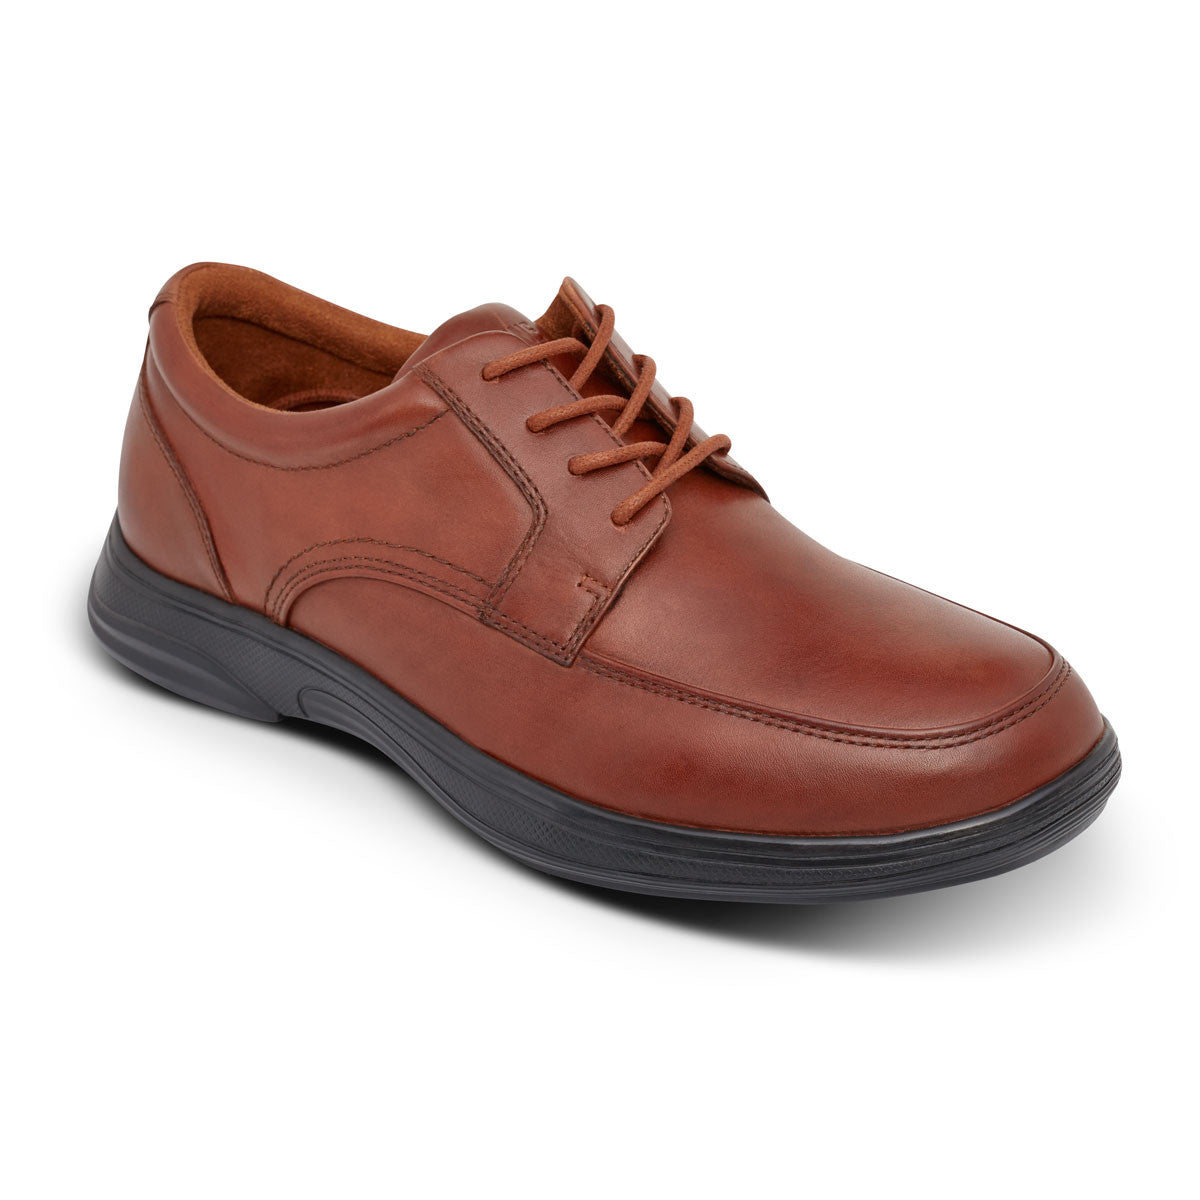 Men's Casual Oxford No12 (Burnished Brown)